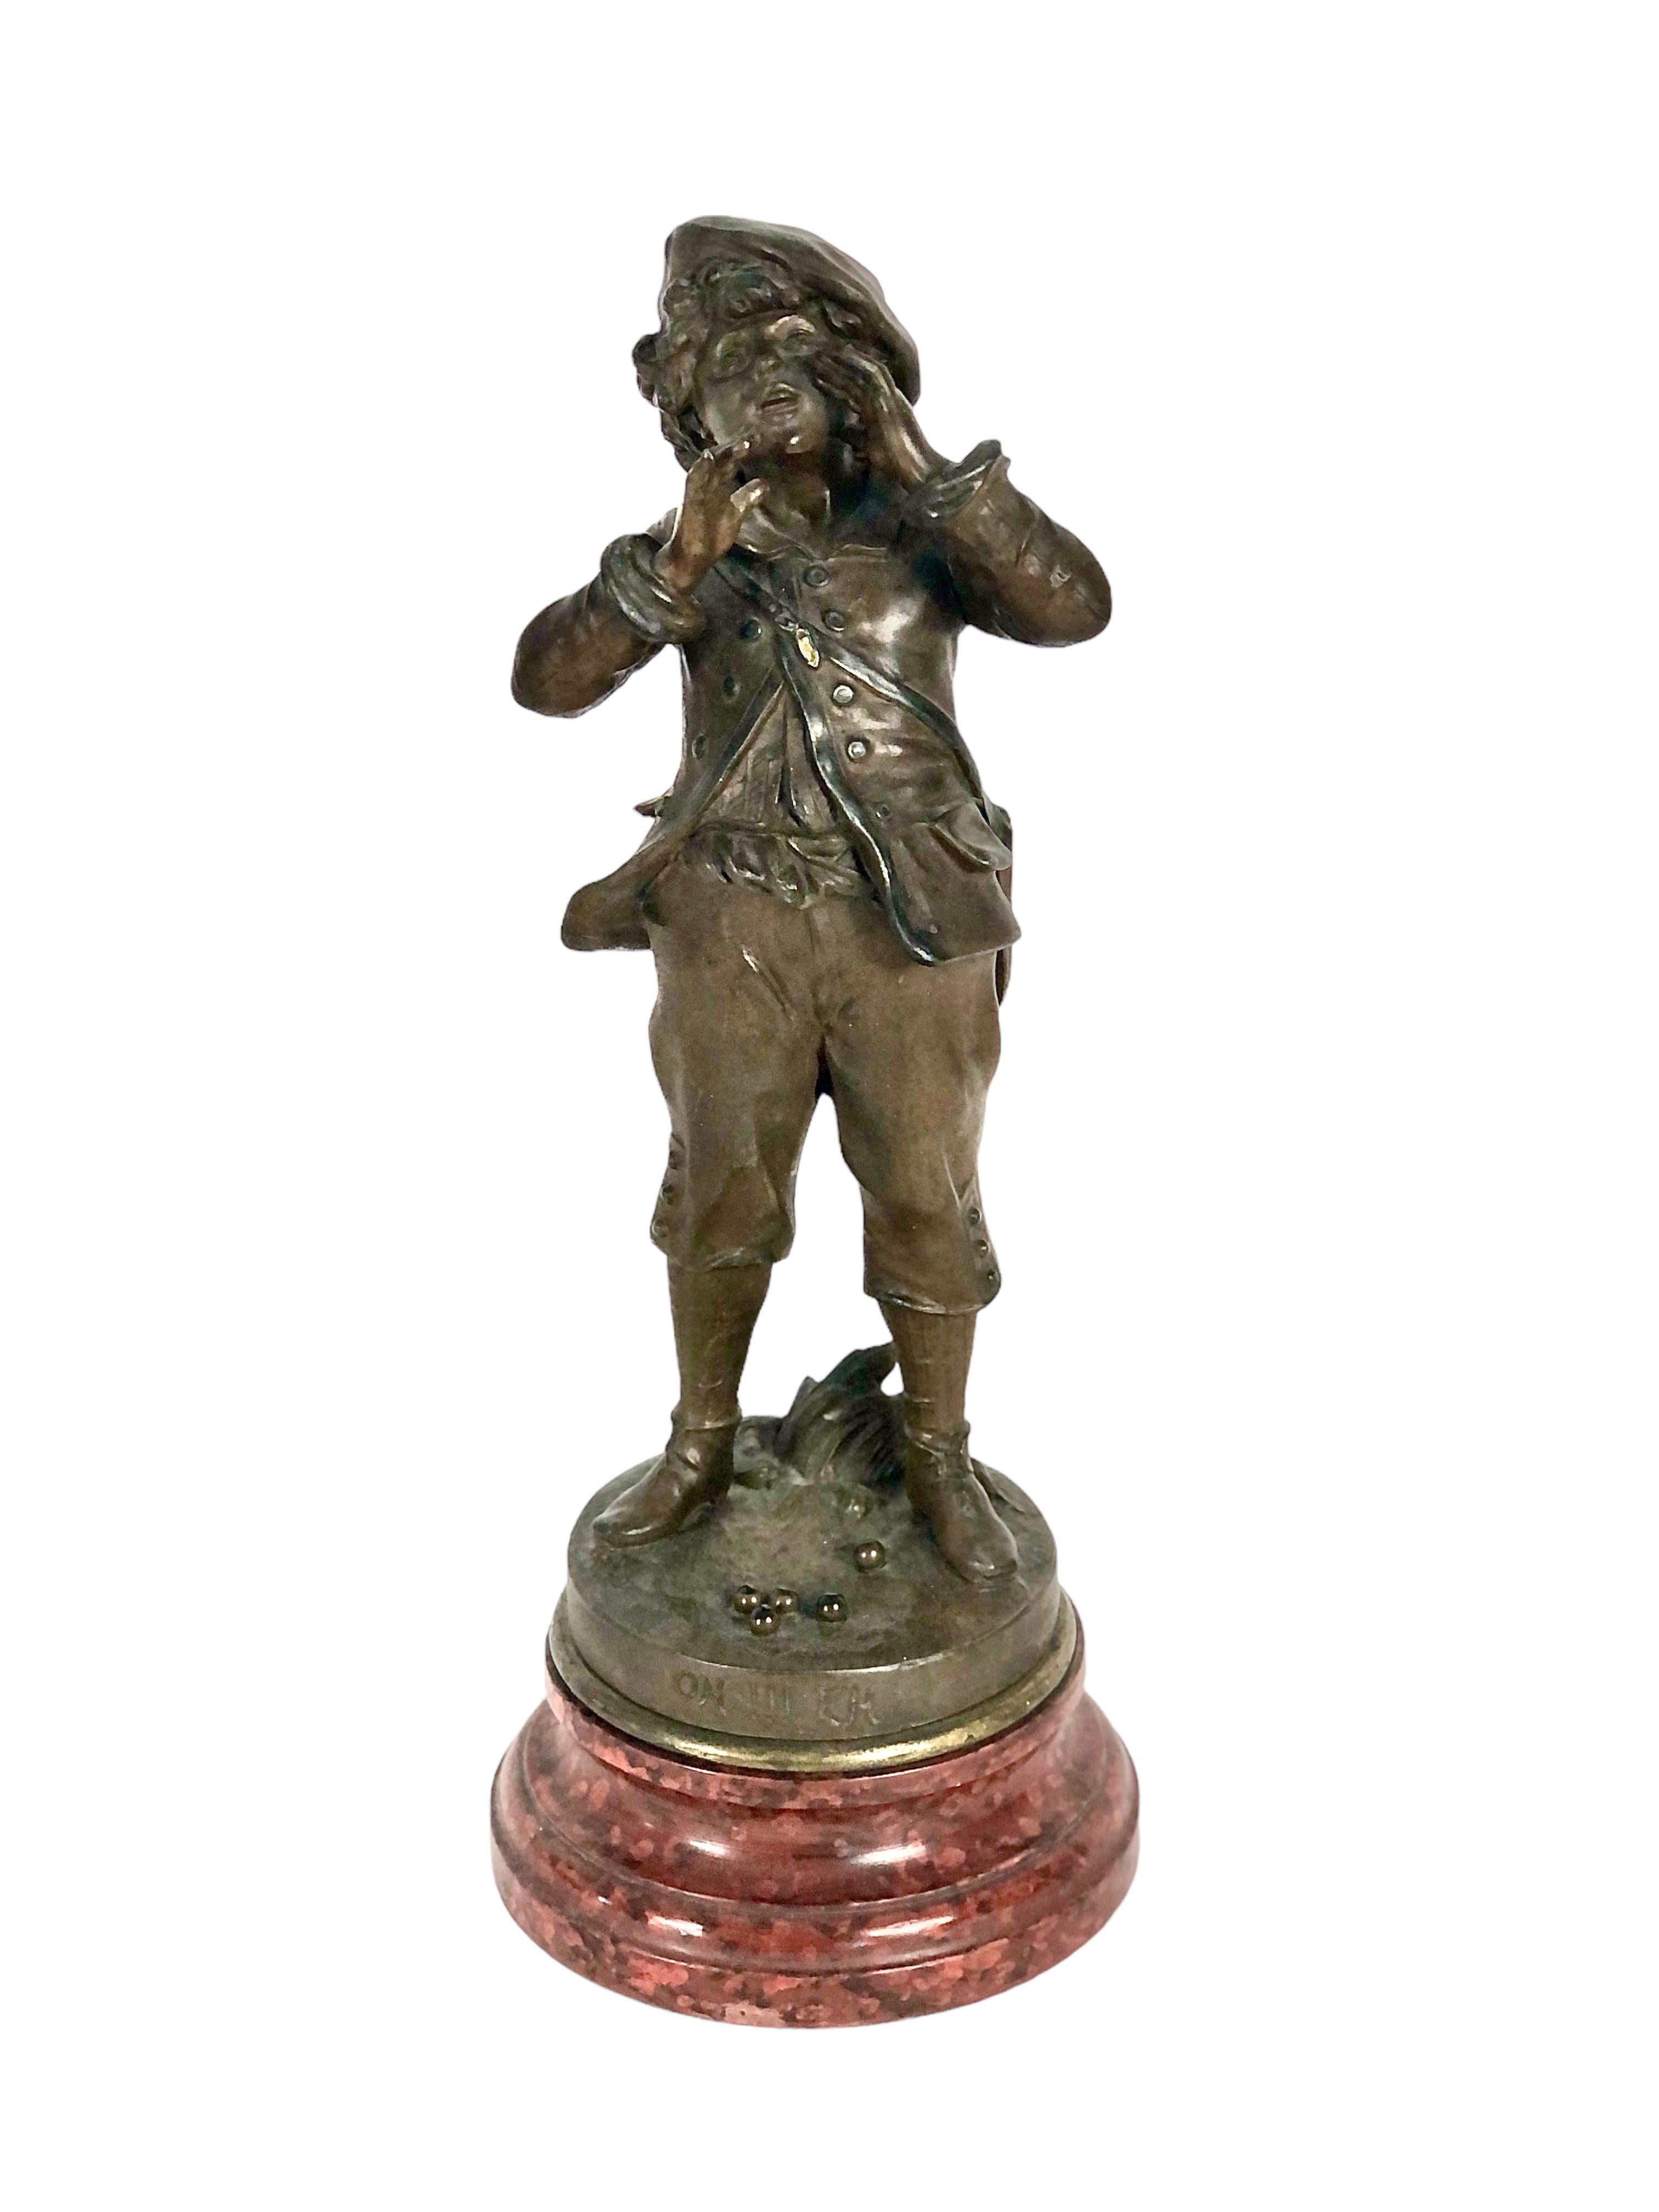 Introducing exquisite 19th-century sculptures by Louis Auguste Moreau on 1stdibs. “Sortie d’école” depicts a joyful boy with a spinning top, clad in a charming outfit, standing on a red faux marble-painted wooden base. Beside him, “Oh !!! Eh”